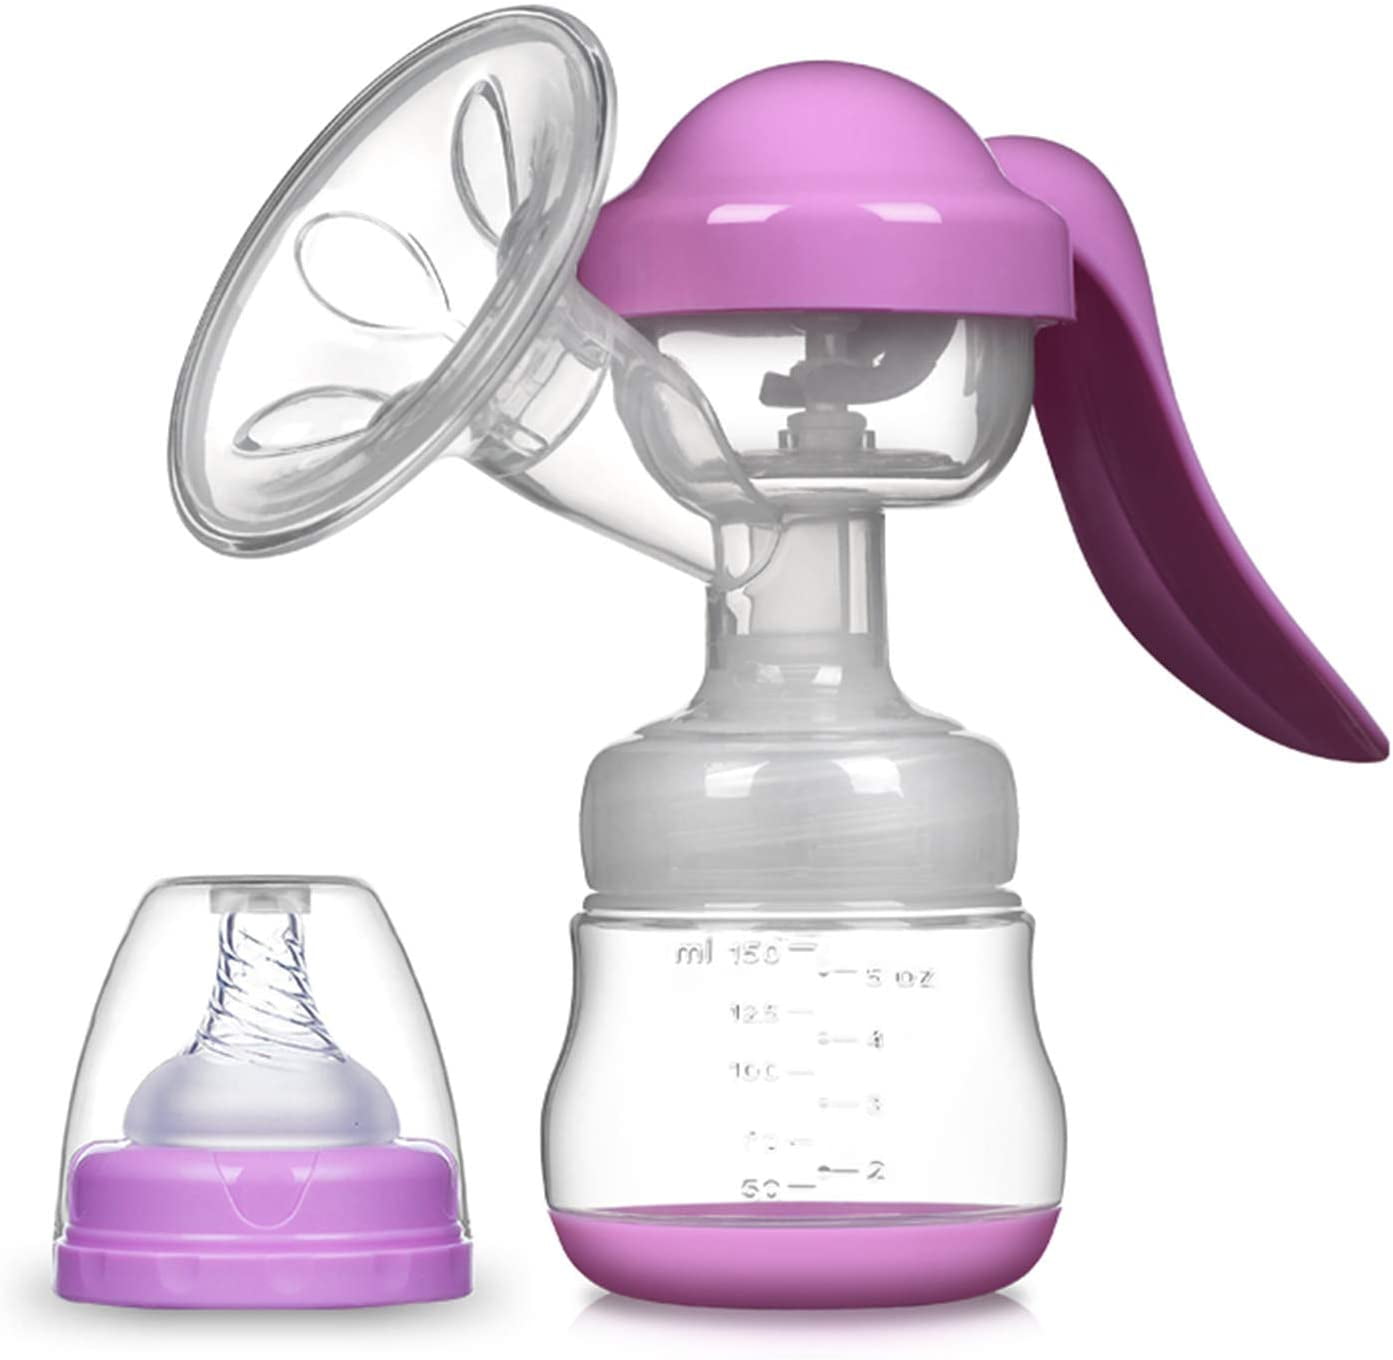 Best Manual Breast Pump, Adjustable Suction Silicone Hand Pump ...